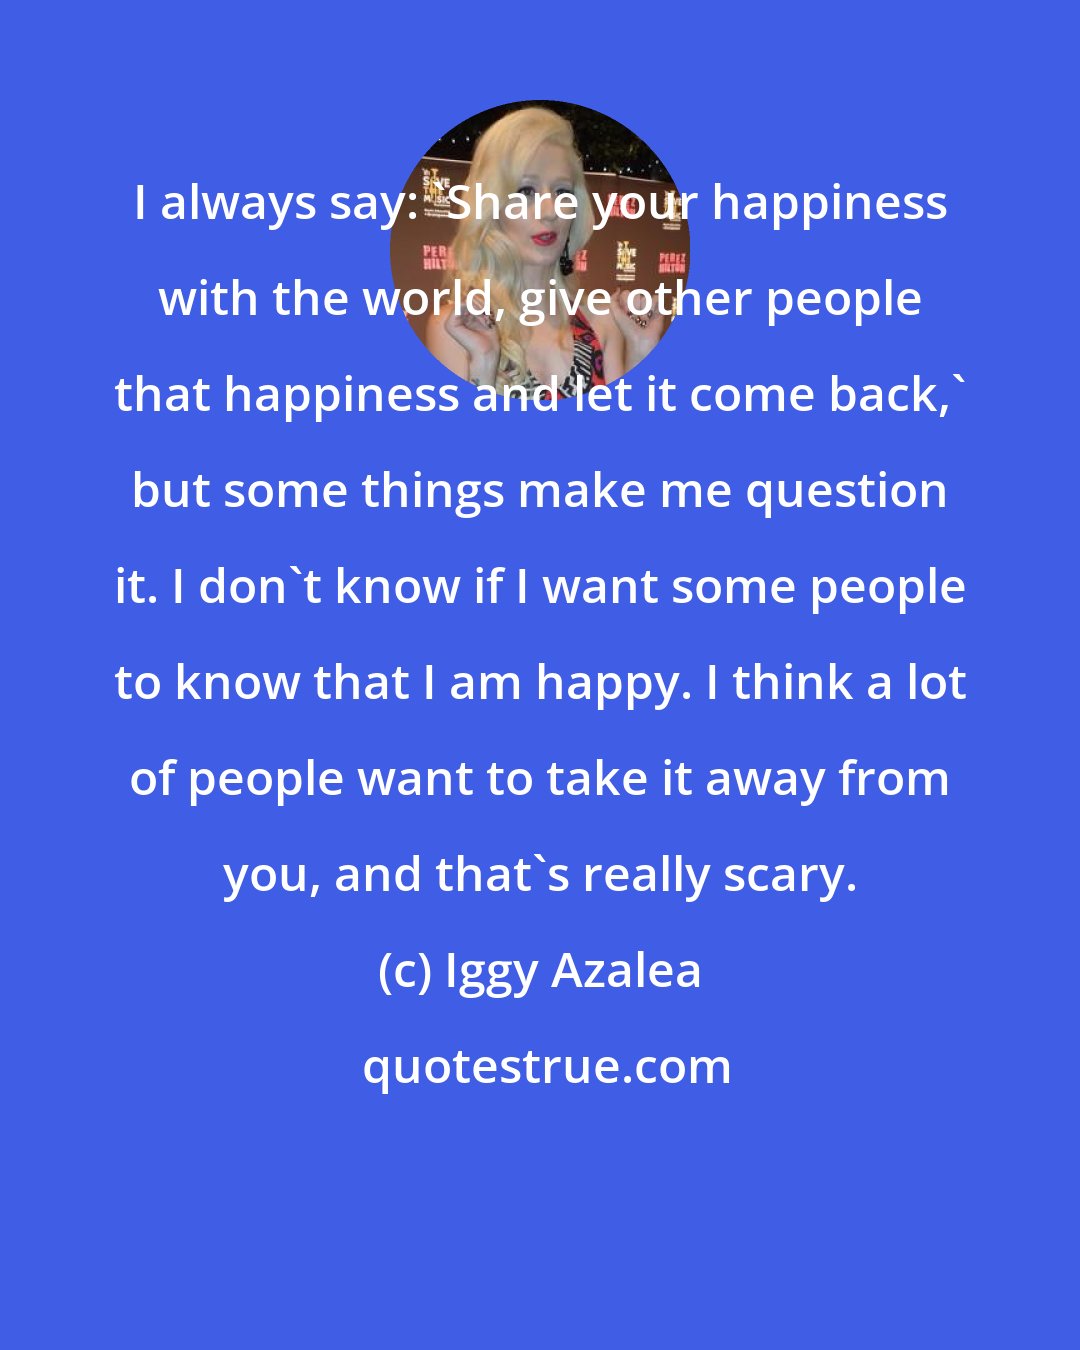 Iggy Azalea: I always say: 'Share your happiness with the world, give other people that happiness and let it come back,' but some things make me question it. I don't know if I want some people to know that I am happy. I think a lot of people want to take it away from you, and that's really scary.